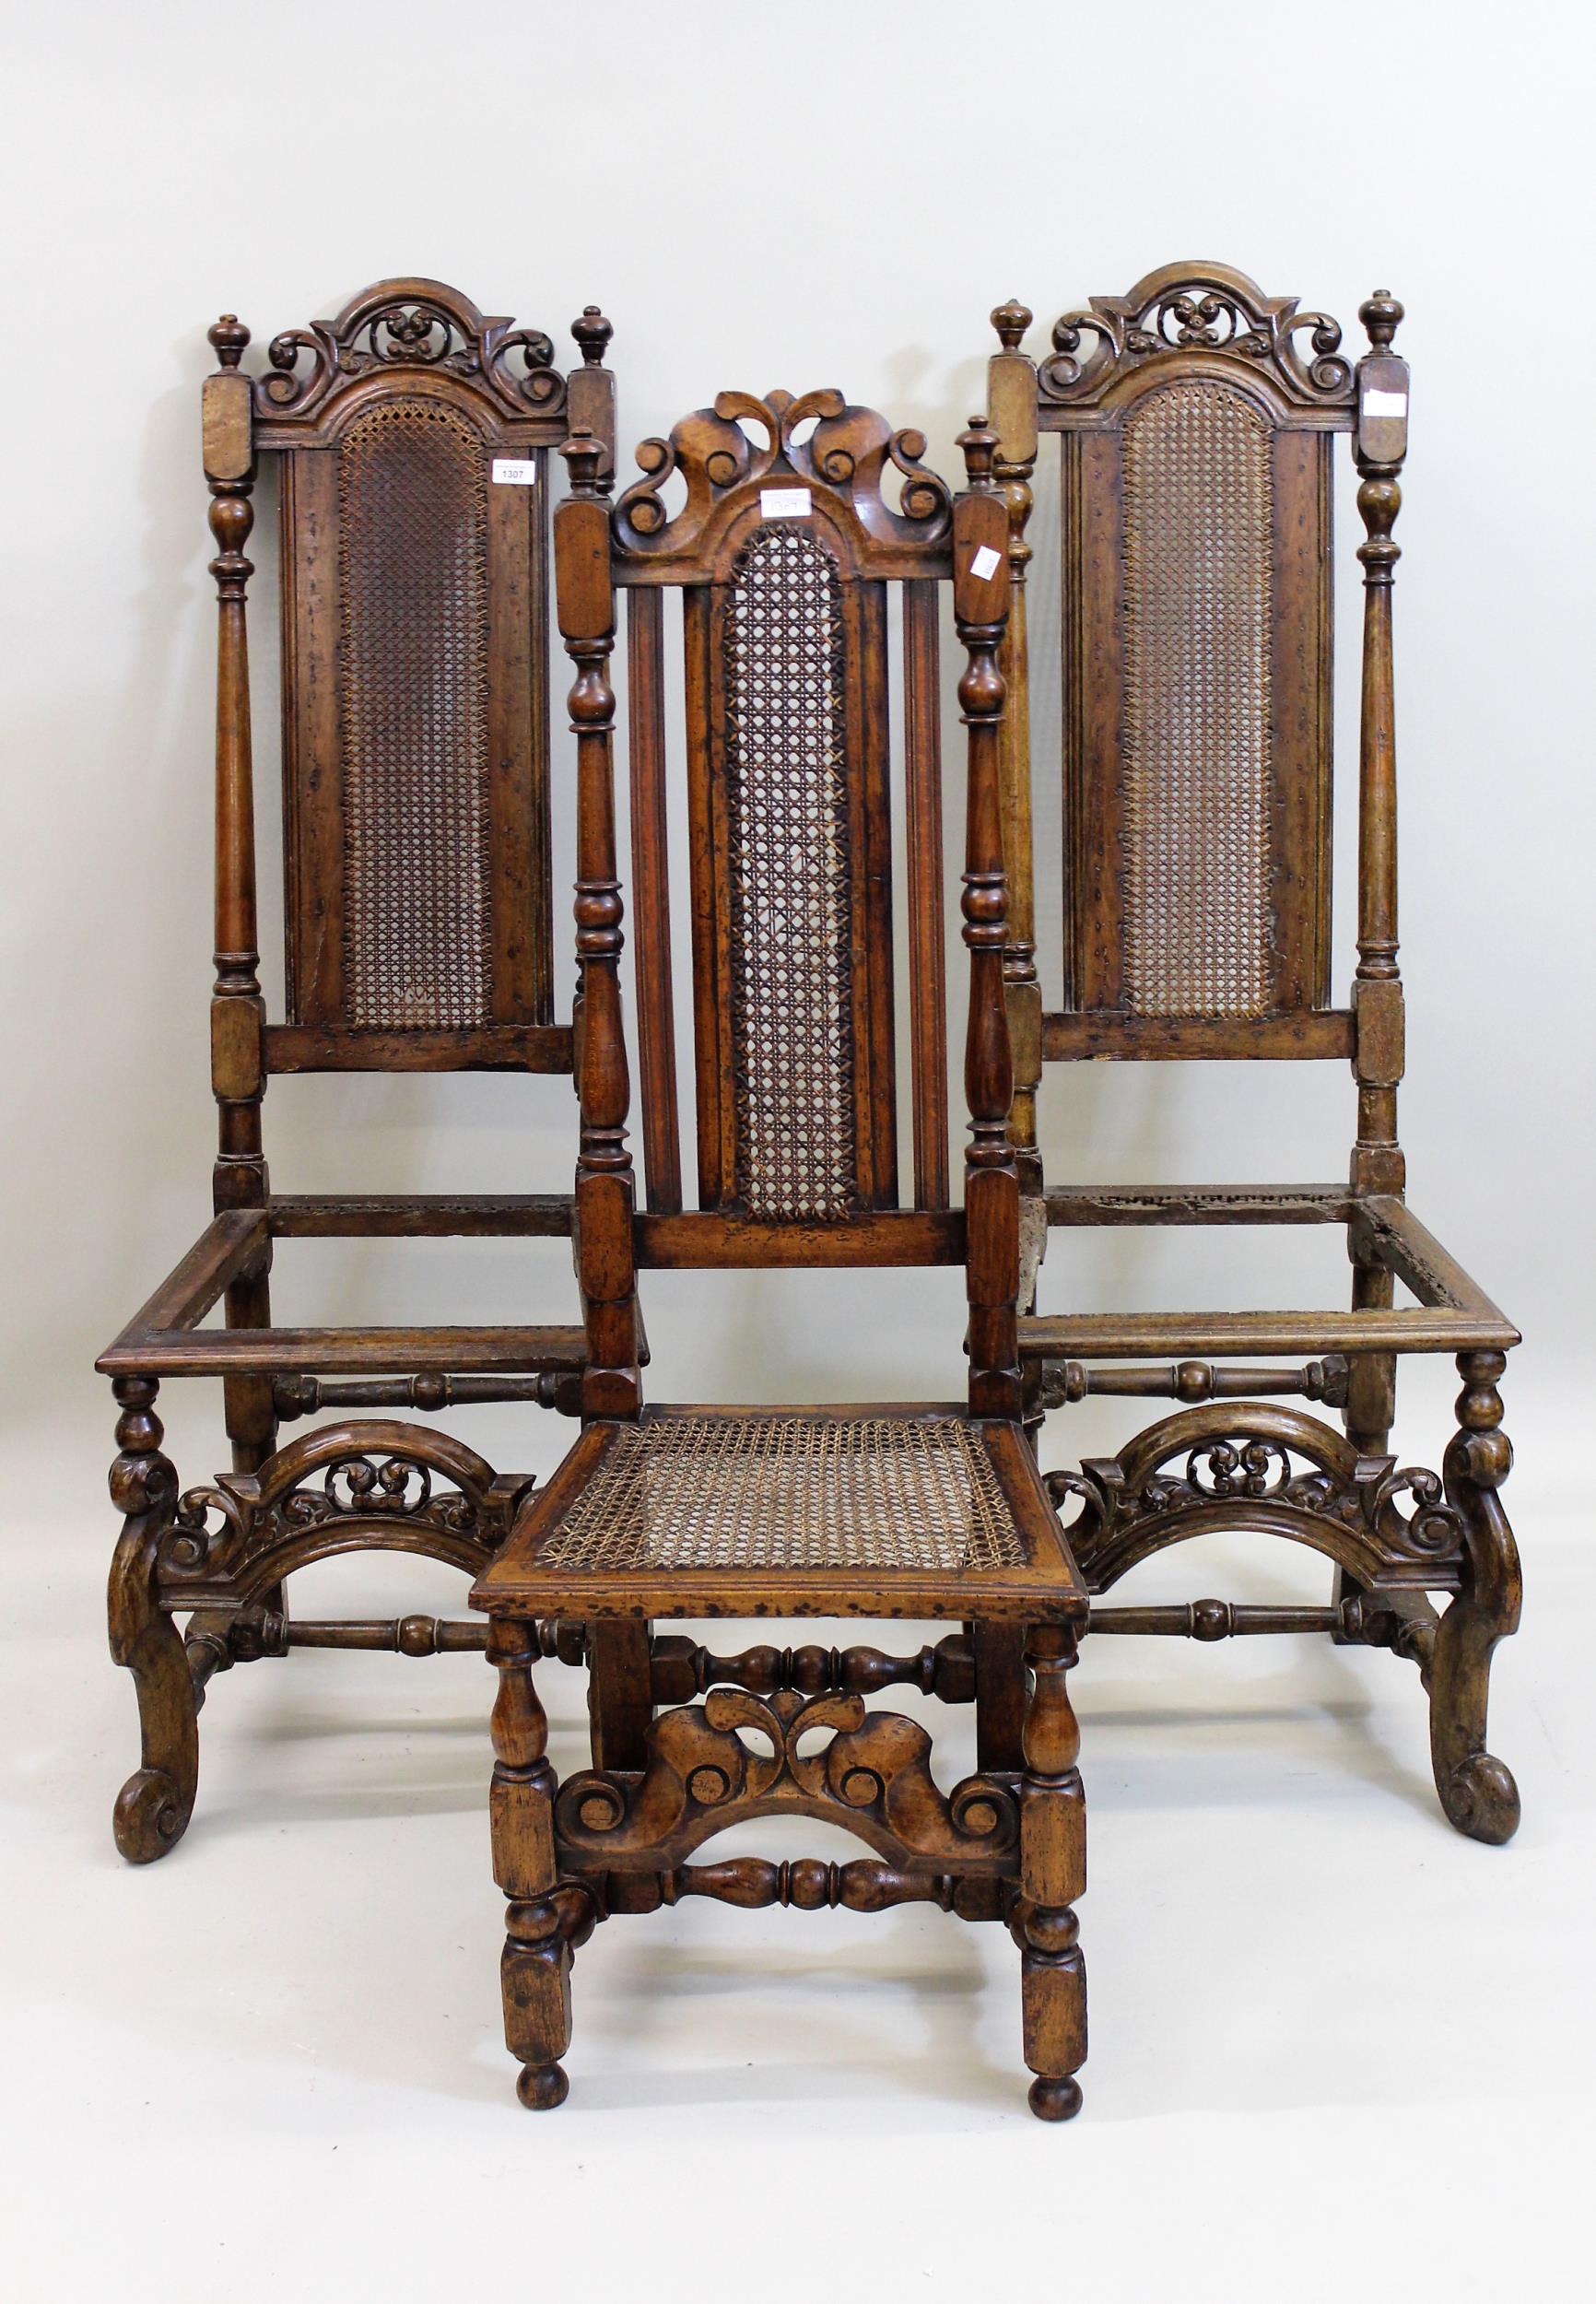 Pair of Carolean (late 17th Century) walnut side chairs, the high cane inset backs with pierced